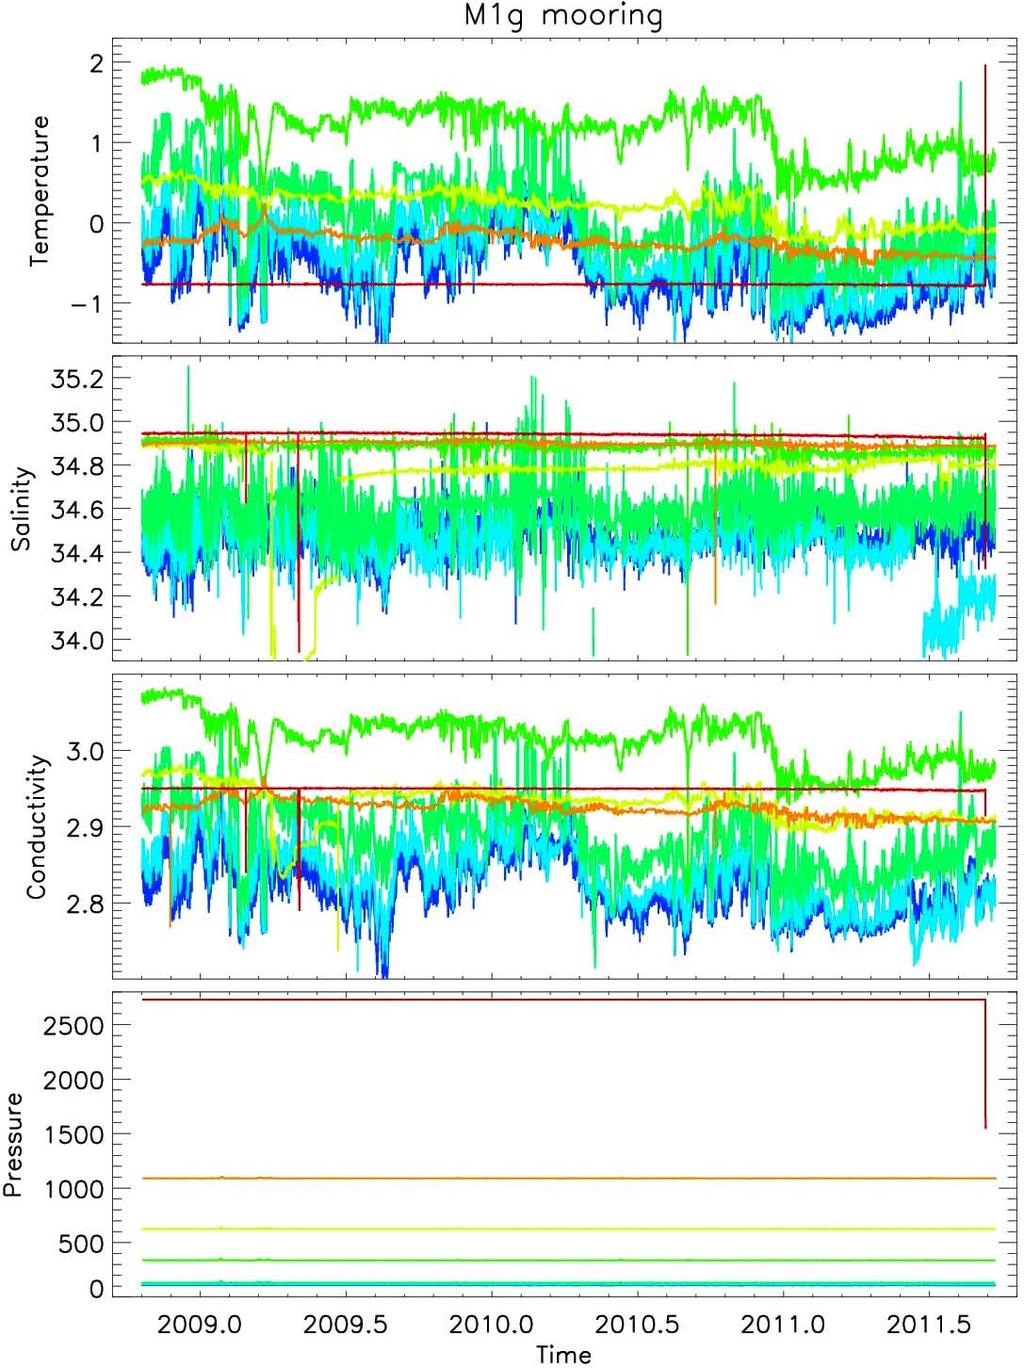 II.3.3.2. Preliminary look at M1g mooring data Preliminary look at the data provided by M1g SBE37s (Figure II.15) suggests that, in general, the quality of data is good.